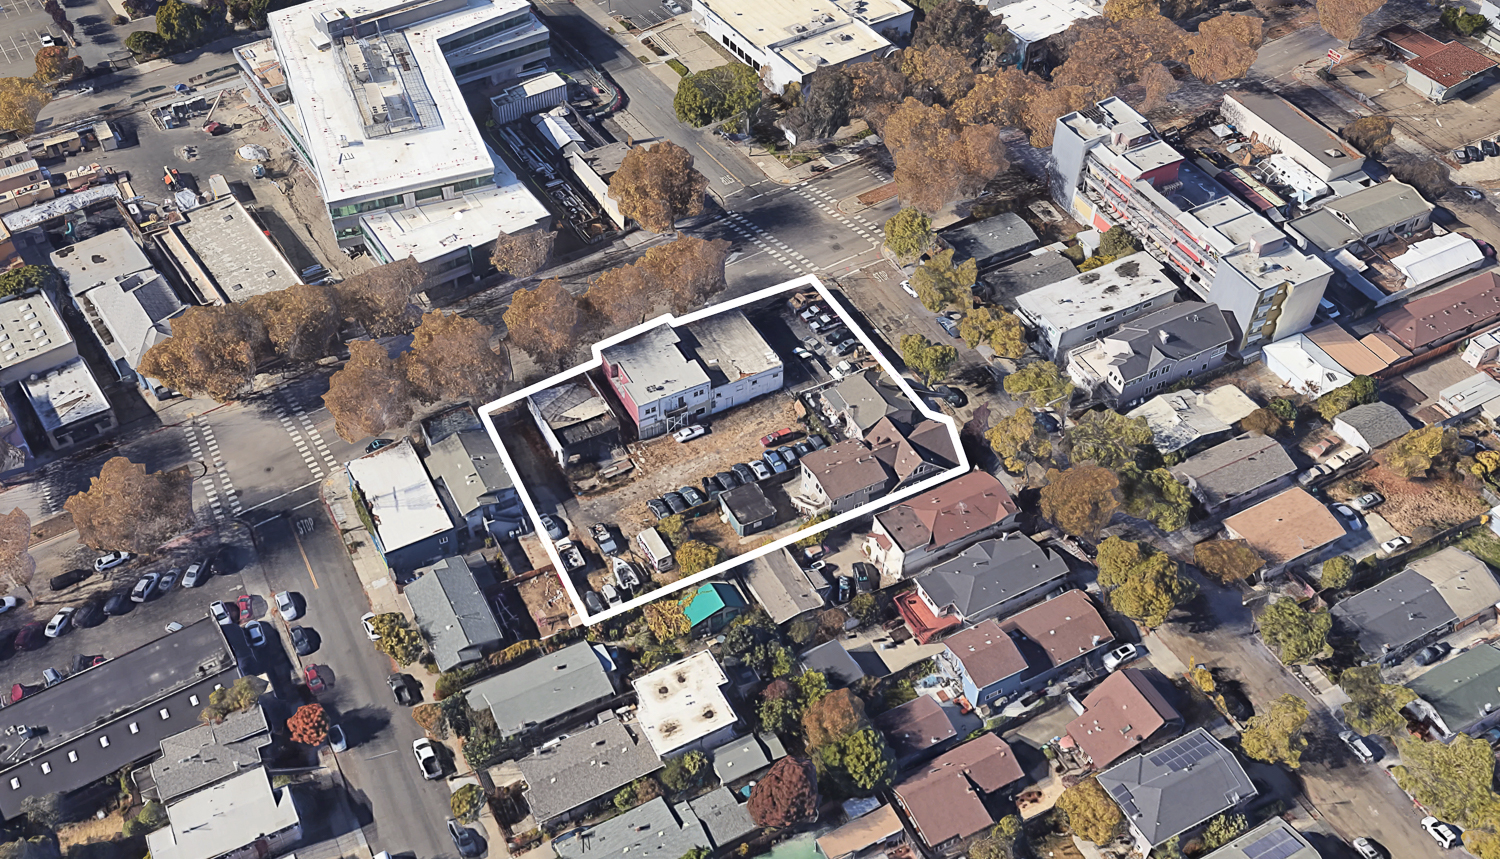 2601 San Pablo Avenue aerial view outlined approximately by YIMBY, image via Google Satellite